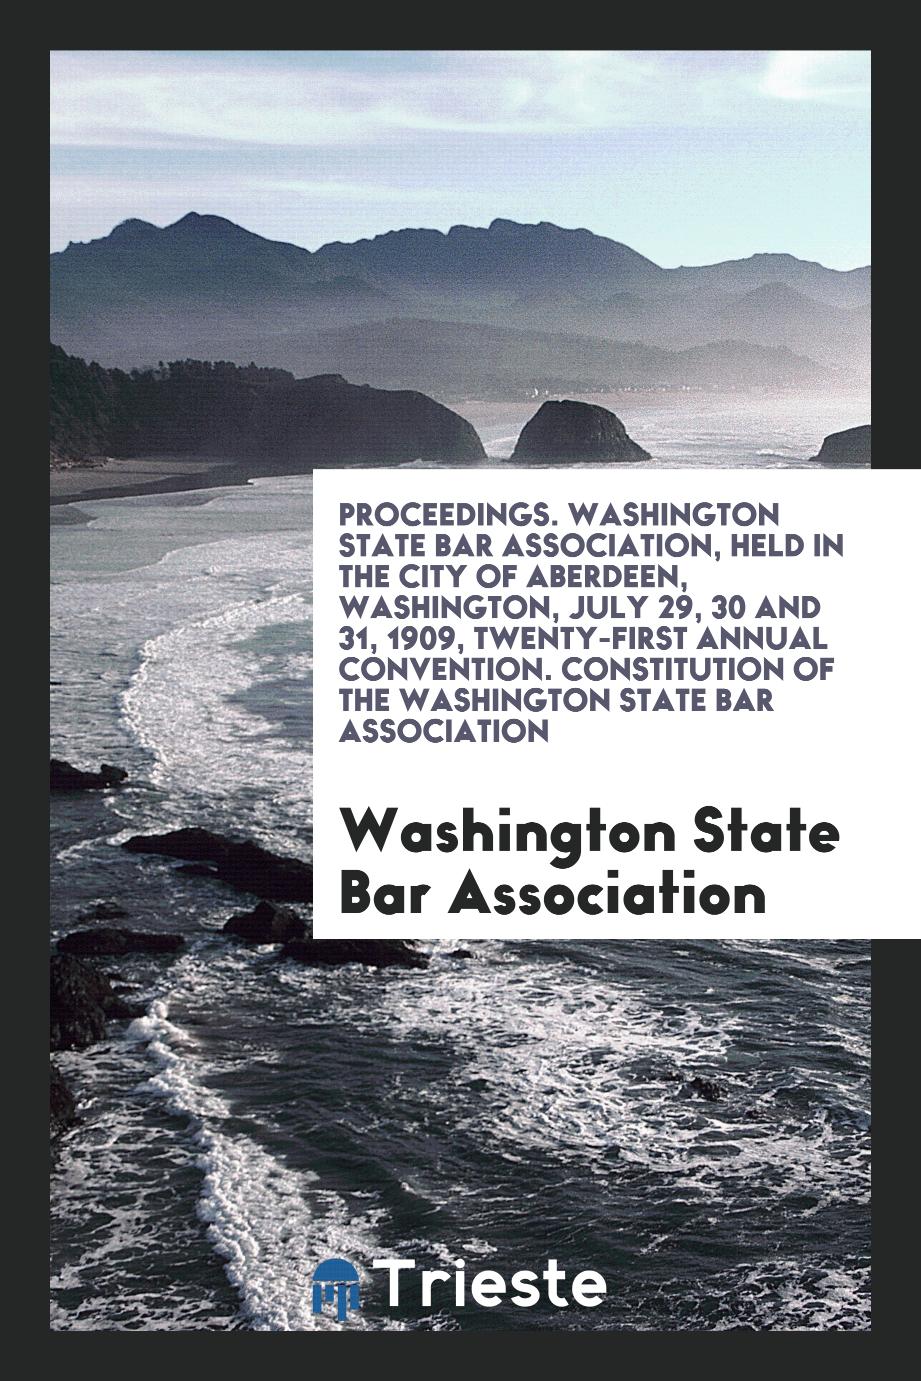 Proceedings. Washington State Bar Association, Held in the City of Aberdeen, Washington, July 29, 30 and 31, 1909, Twenty-First Annual Convention. Constitution of the Washington State Bar Association